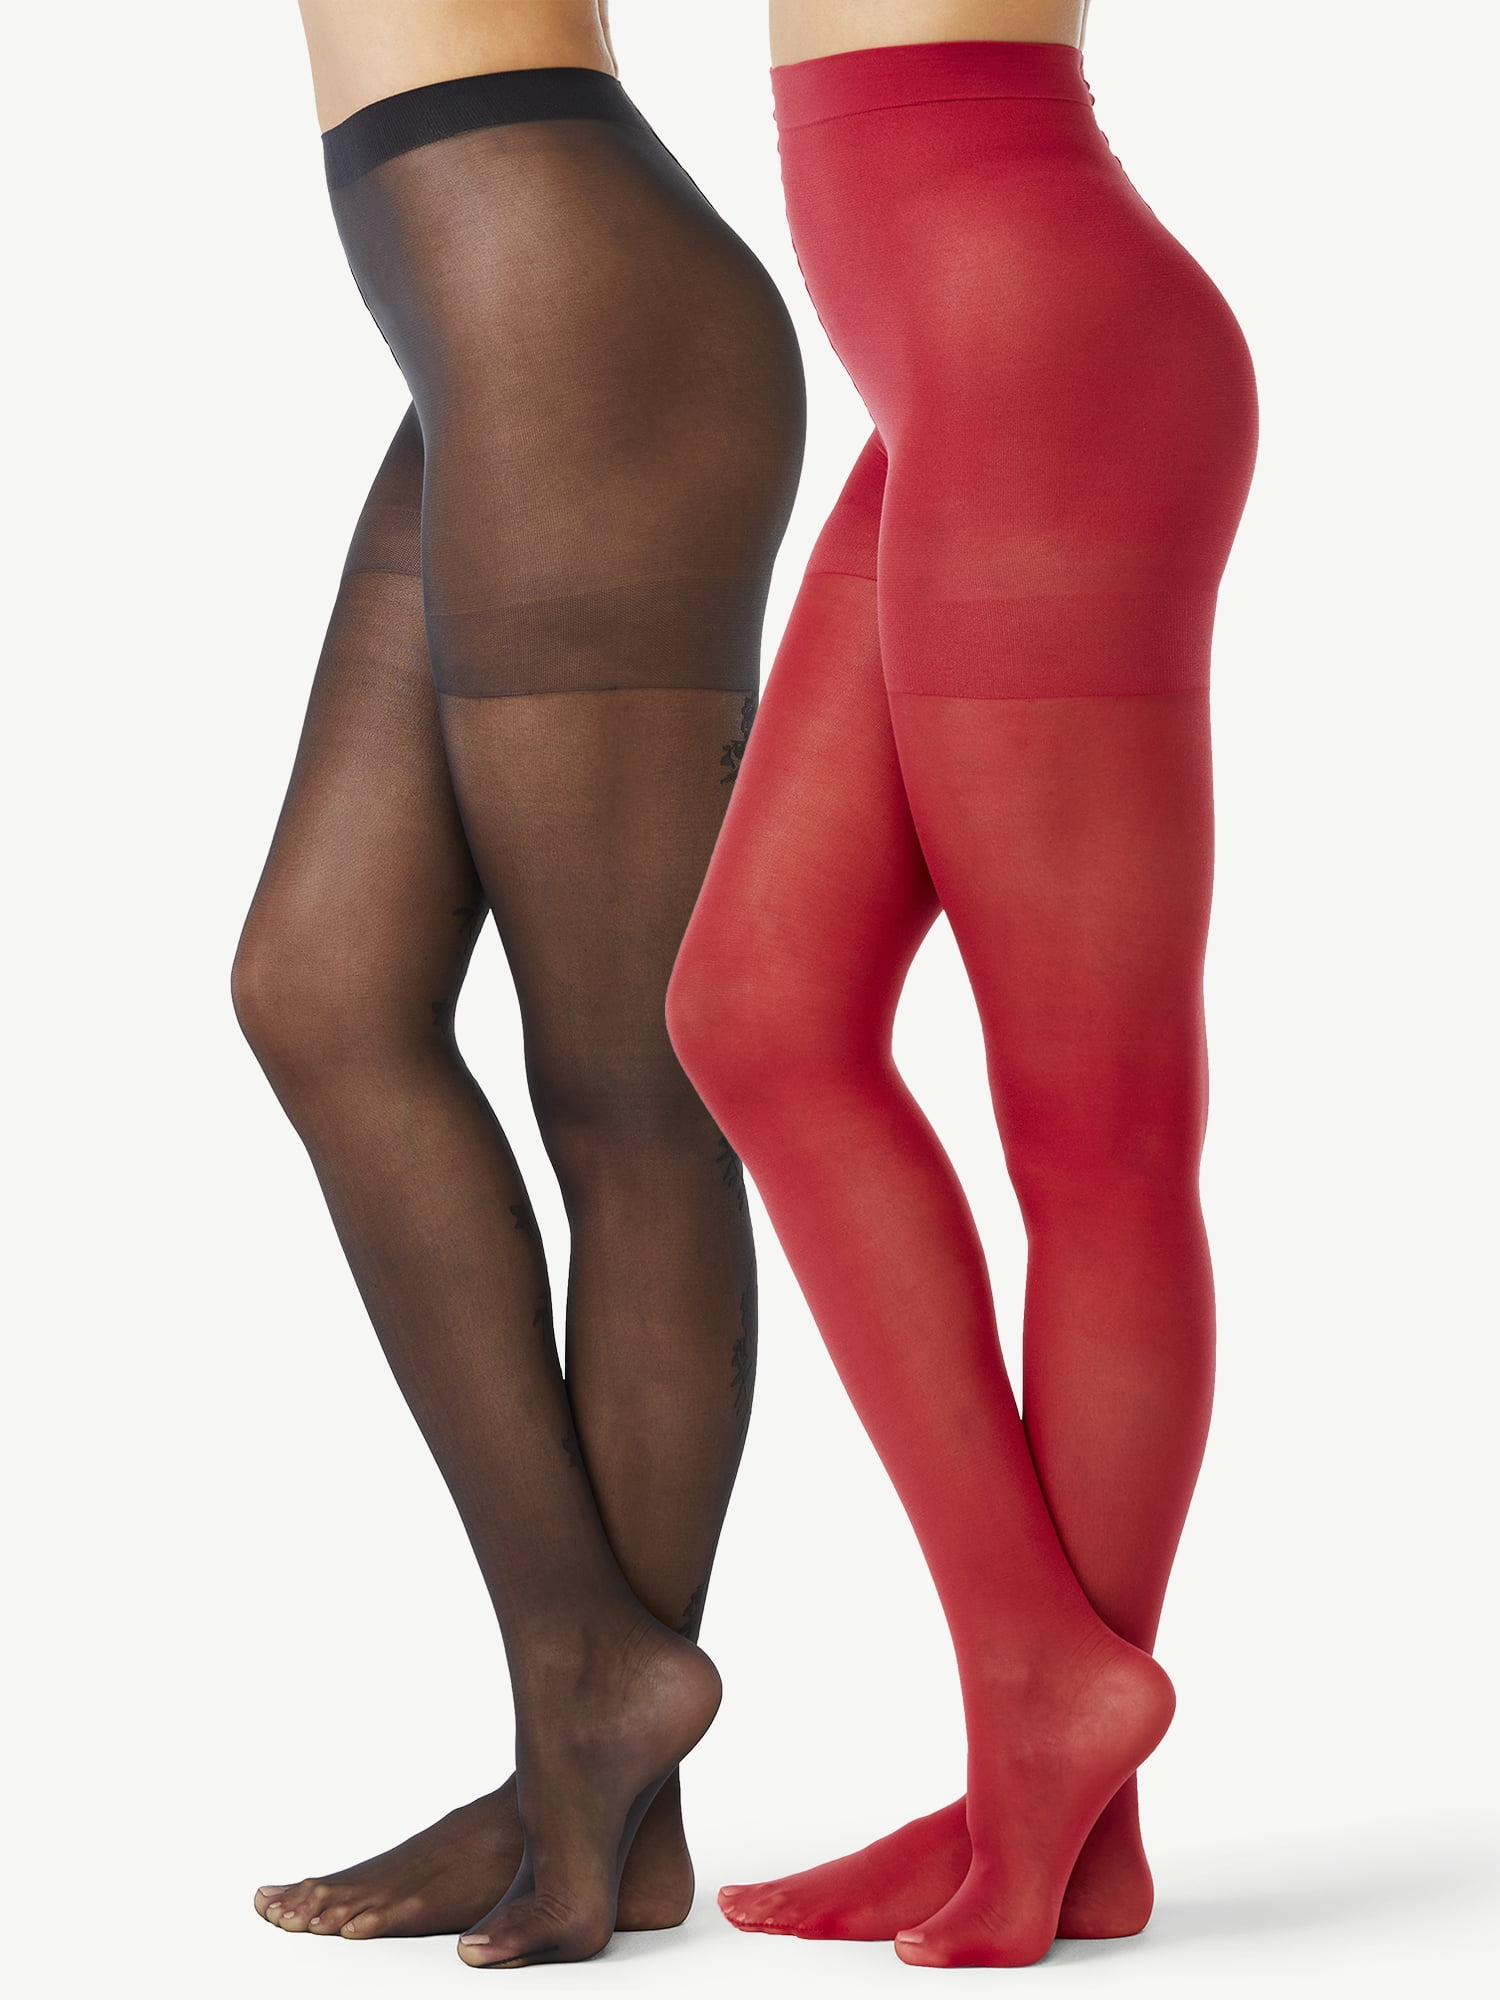 Joyspun Women's Floral and Opaque Sheer Tights, 2-Pack, Sizes S to